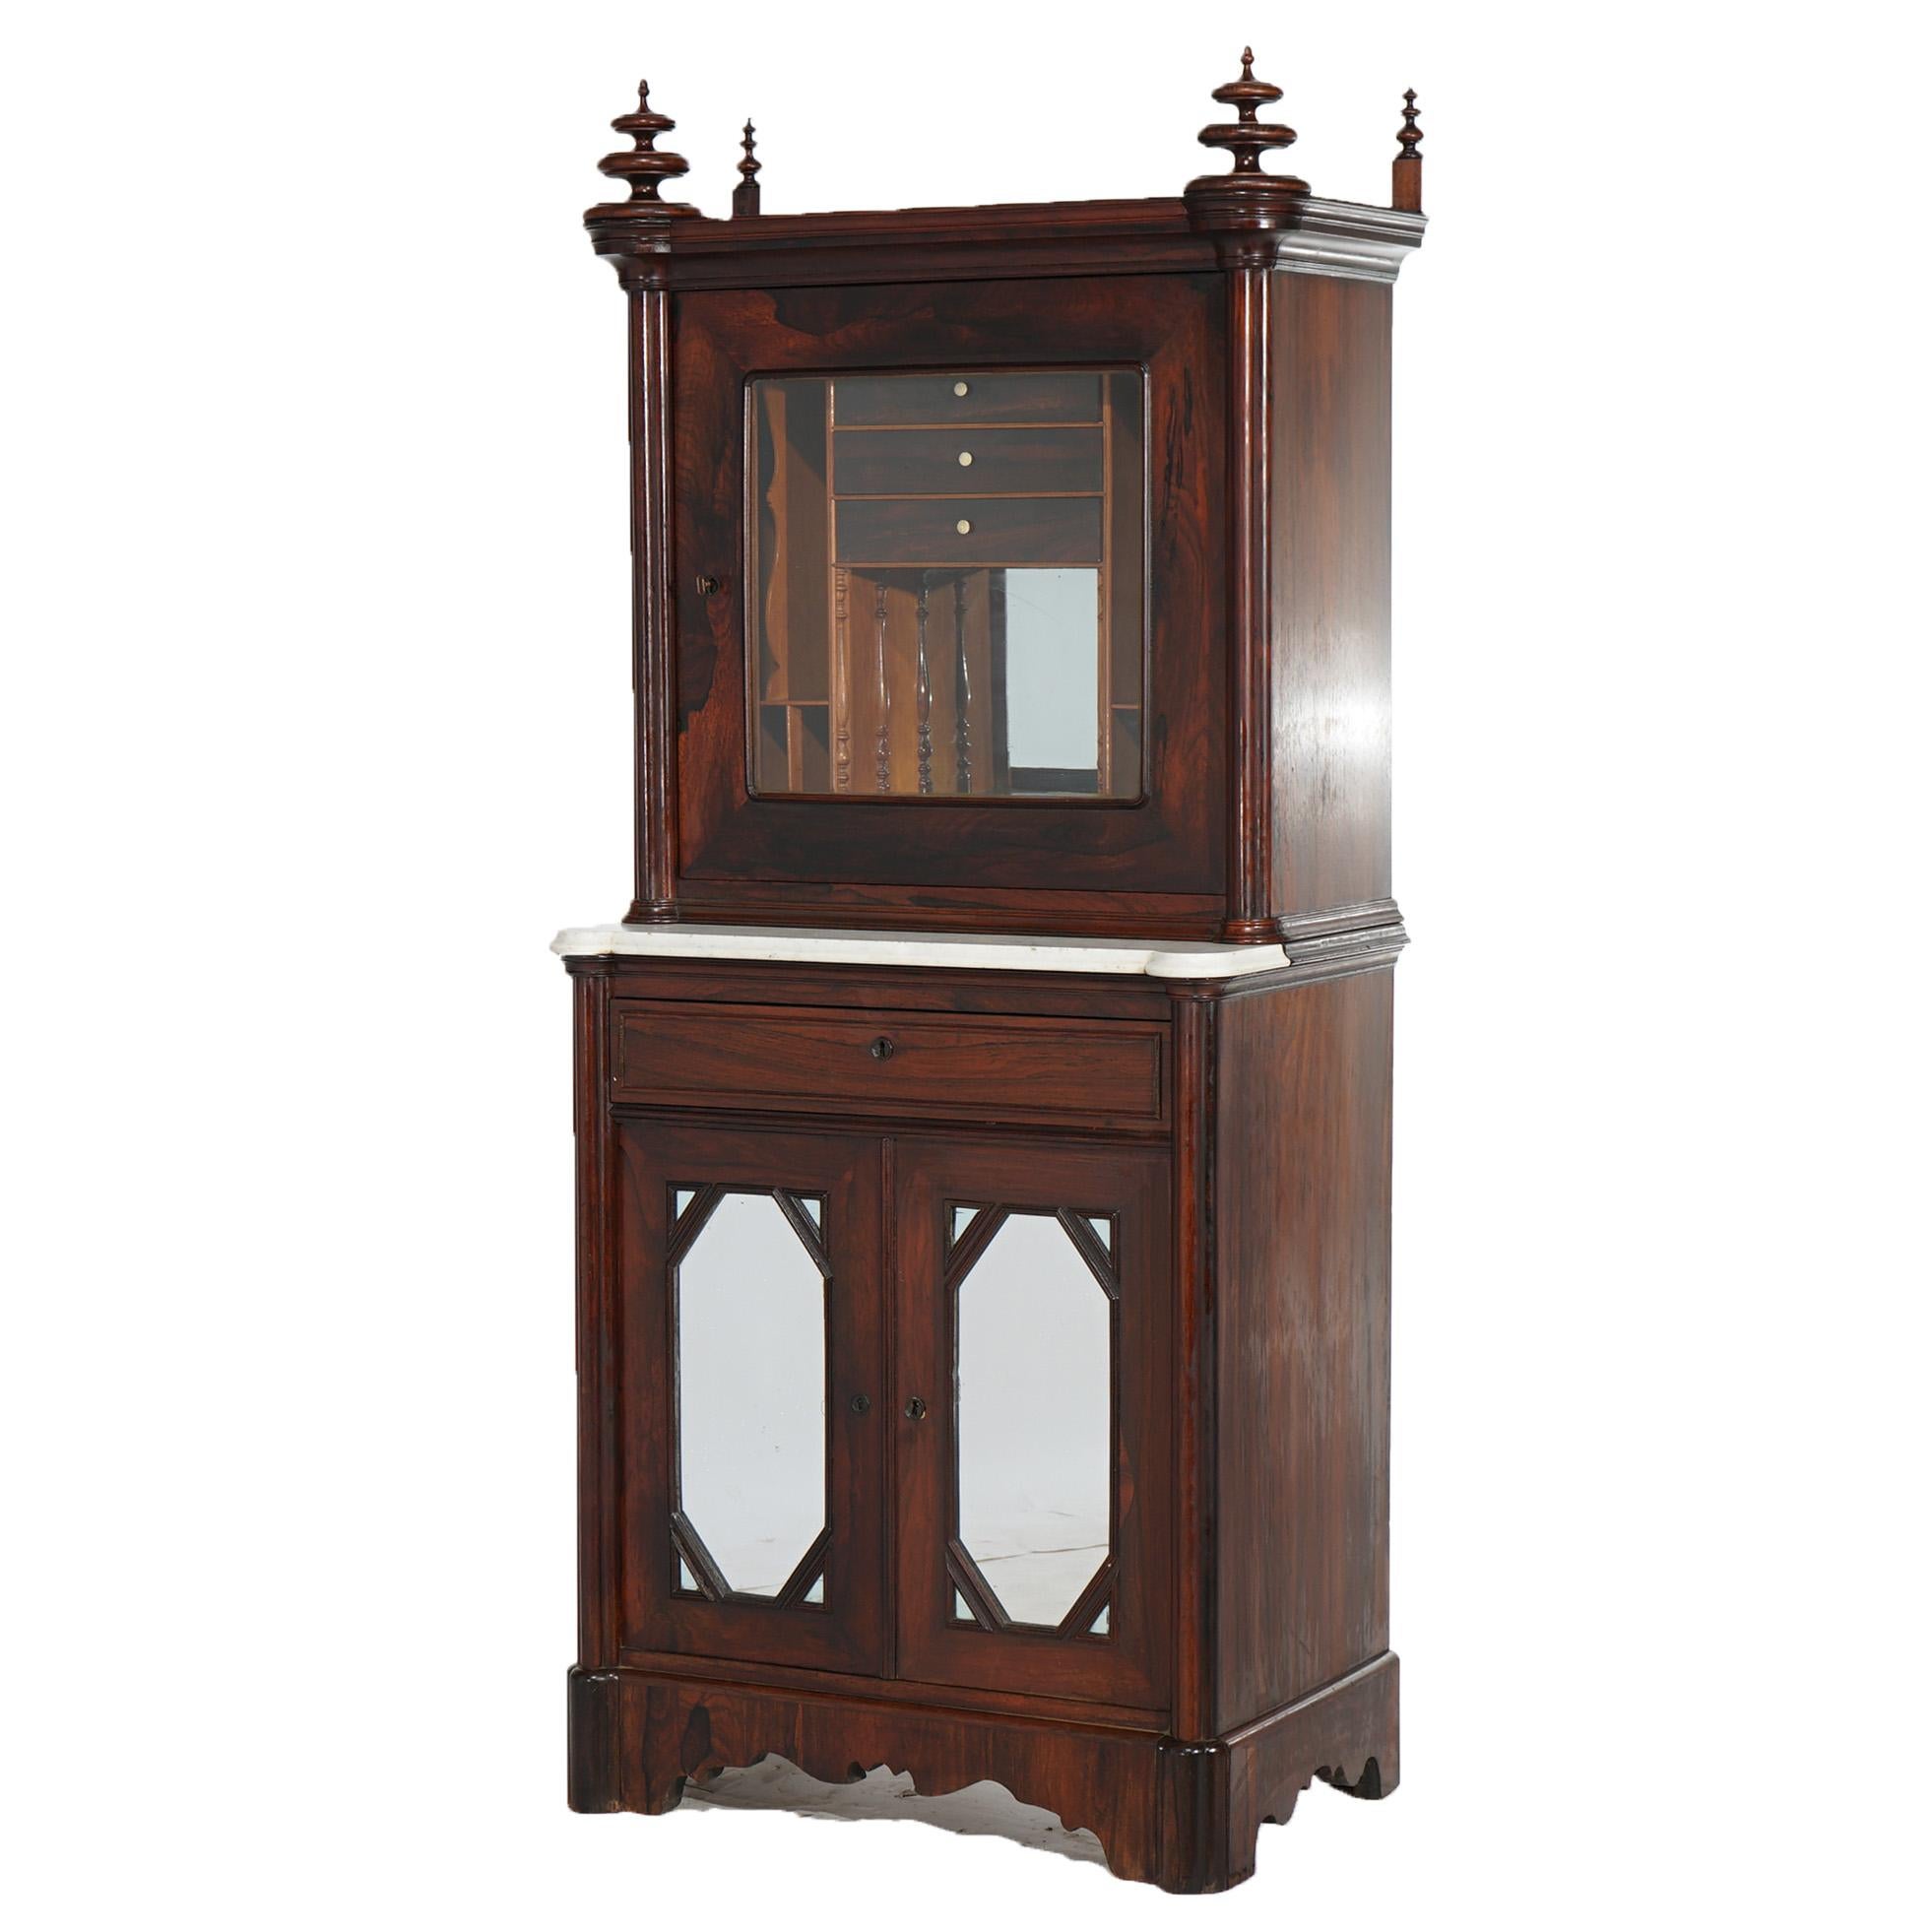 European Antique Gothic Revival Victorian Rosewood & Marble Mirrored Secretary Desk C1850 For Sale